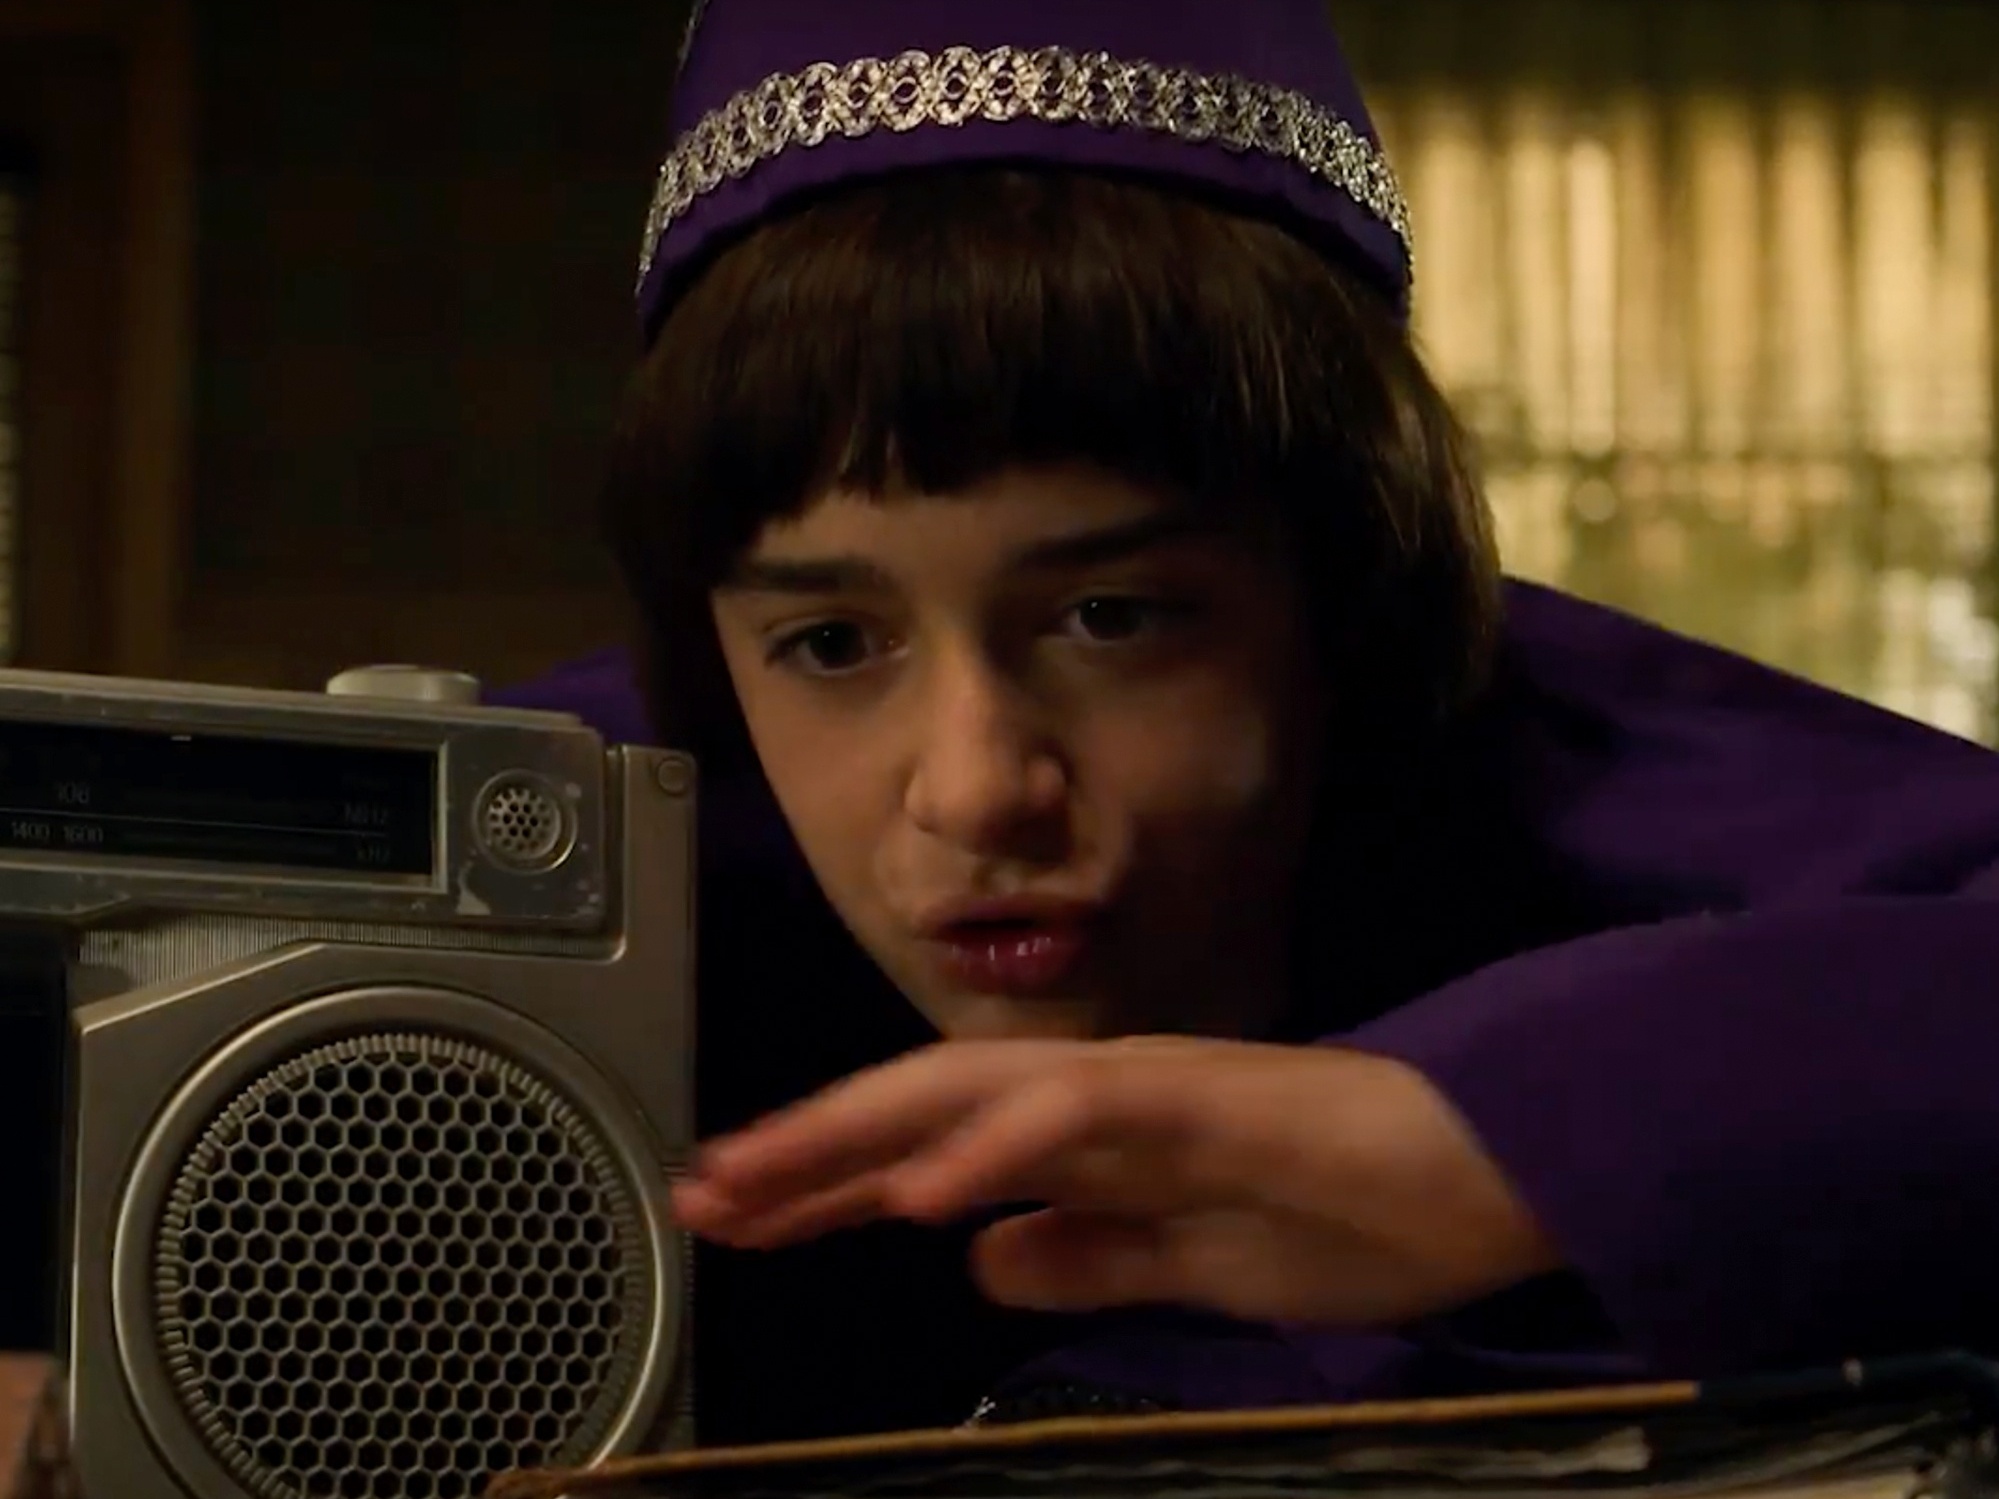 Stranger Things: Atores falam sobre sexualidade de Will Byers